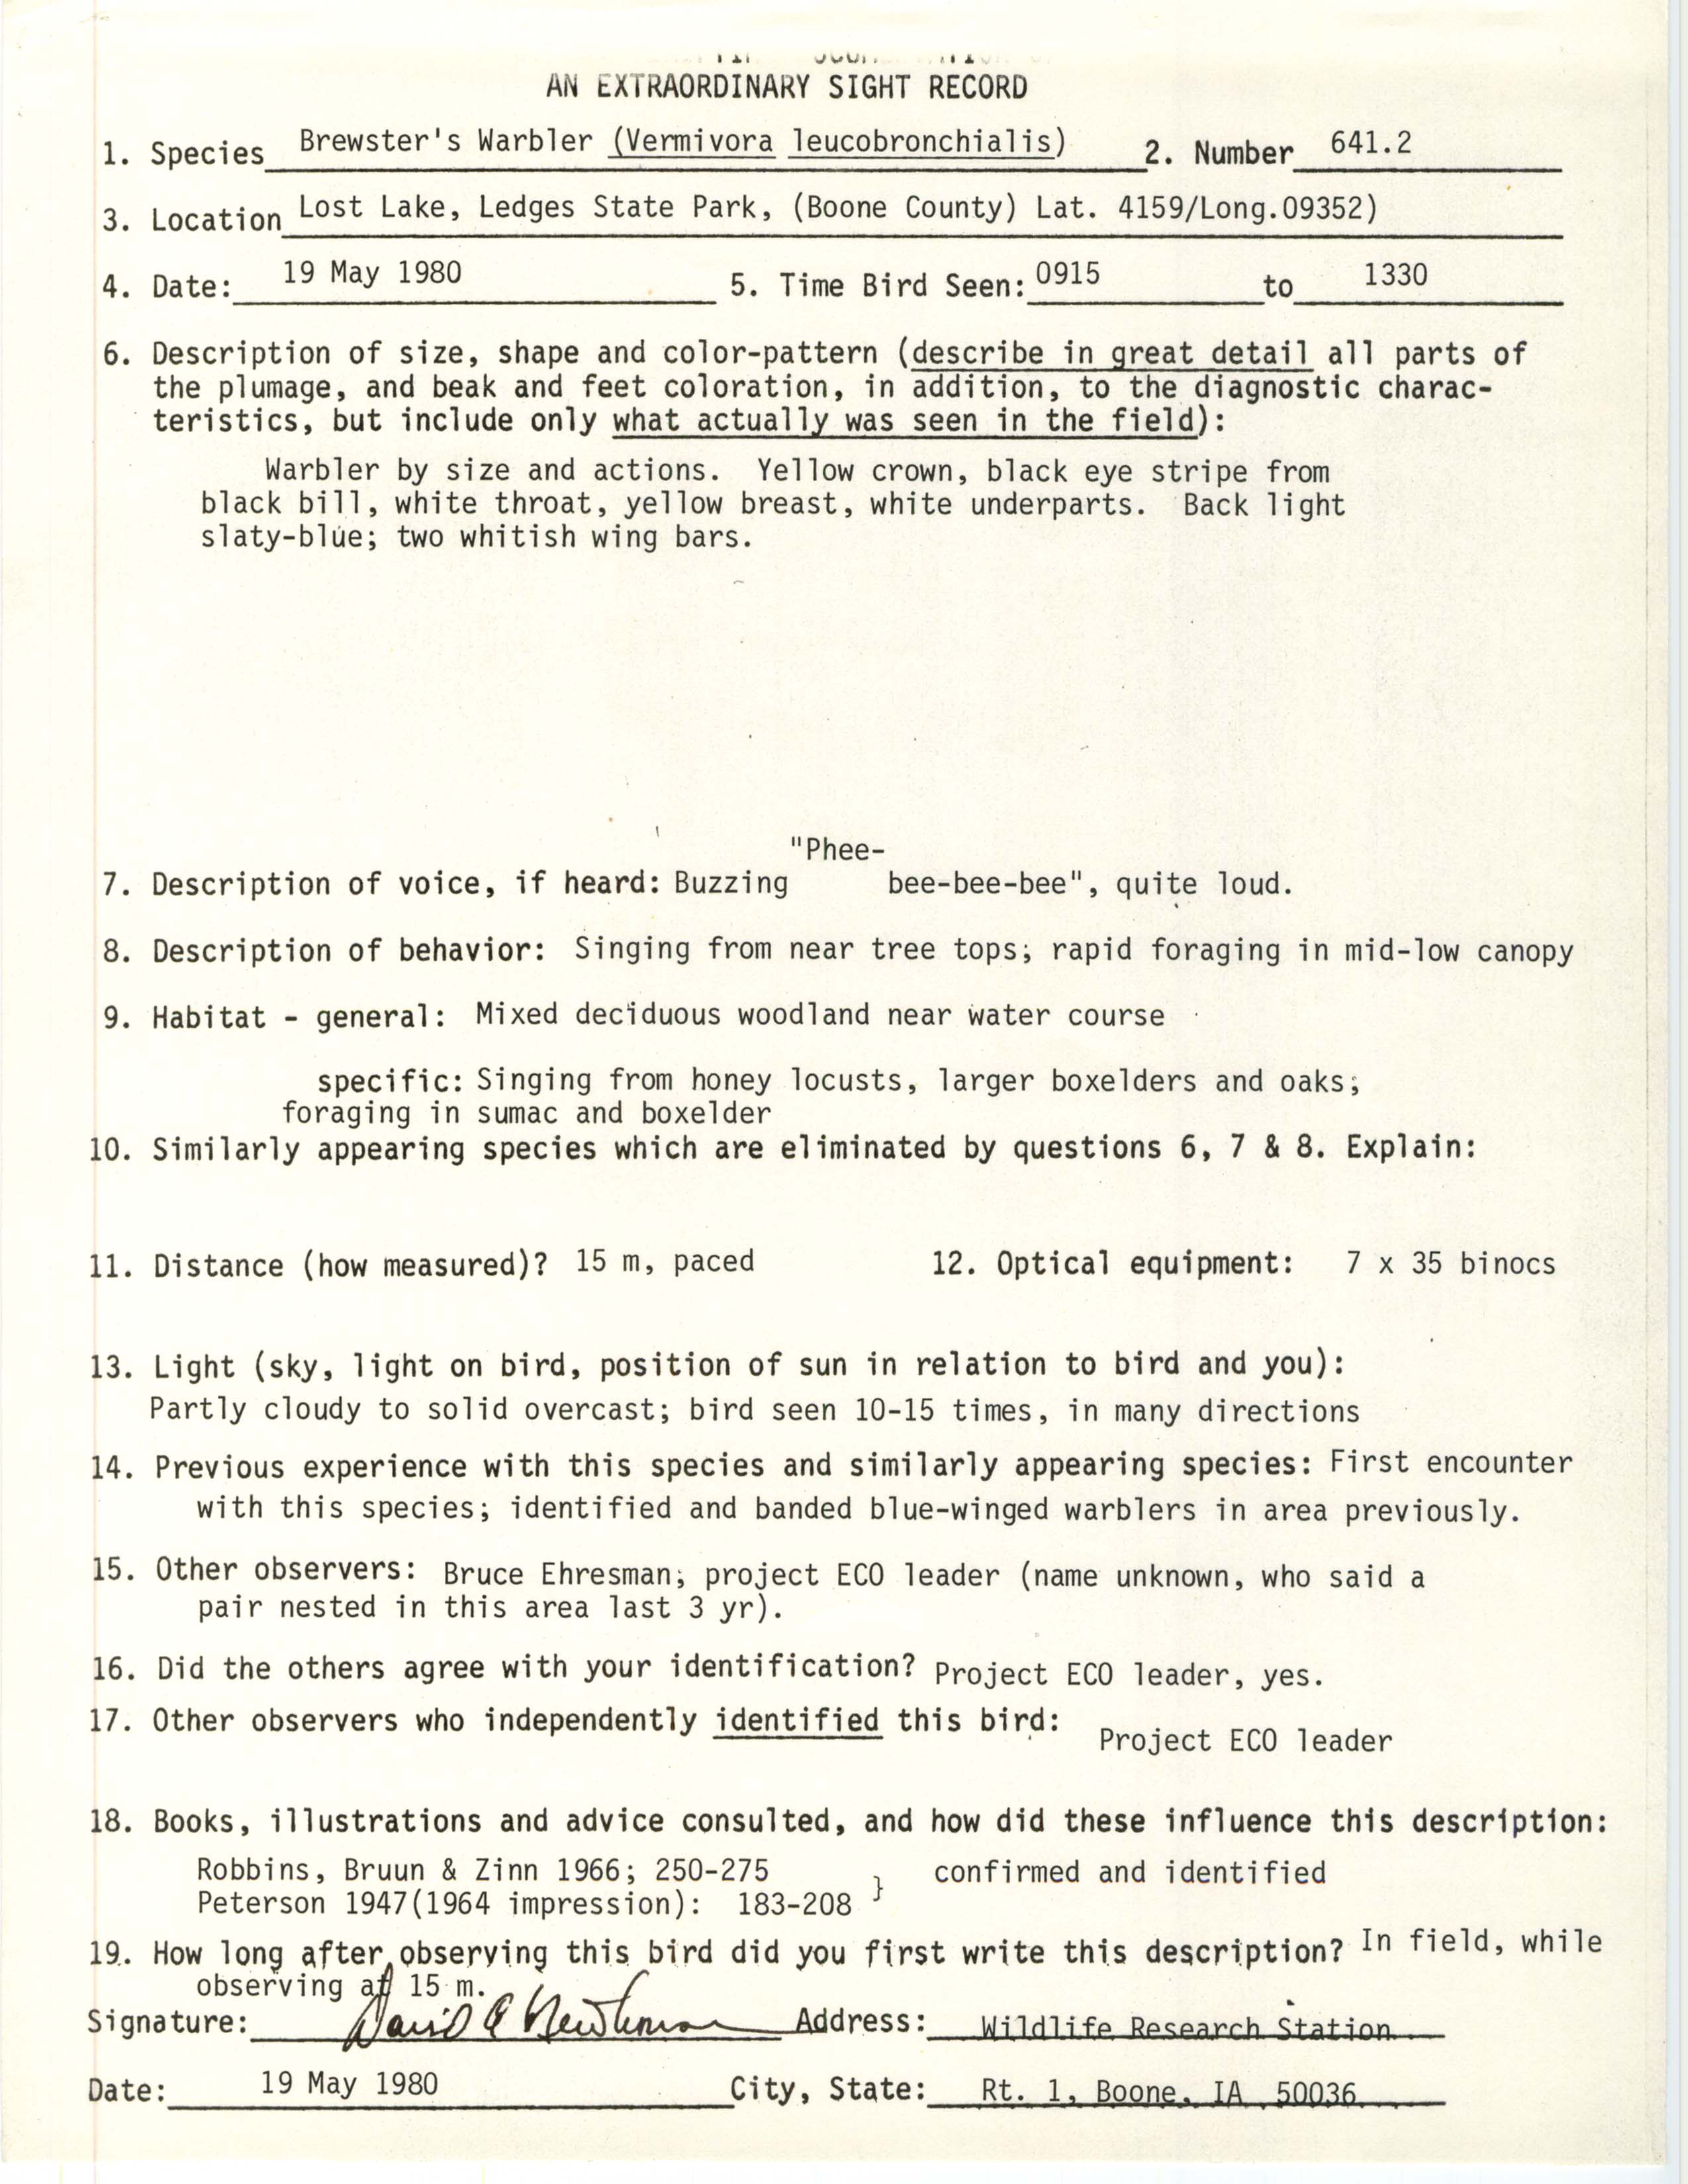 Rare bird documentation form for Brewster's Warbler at the Lost Lake in Ledges State Park, 1980